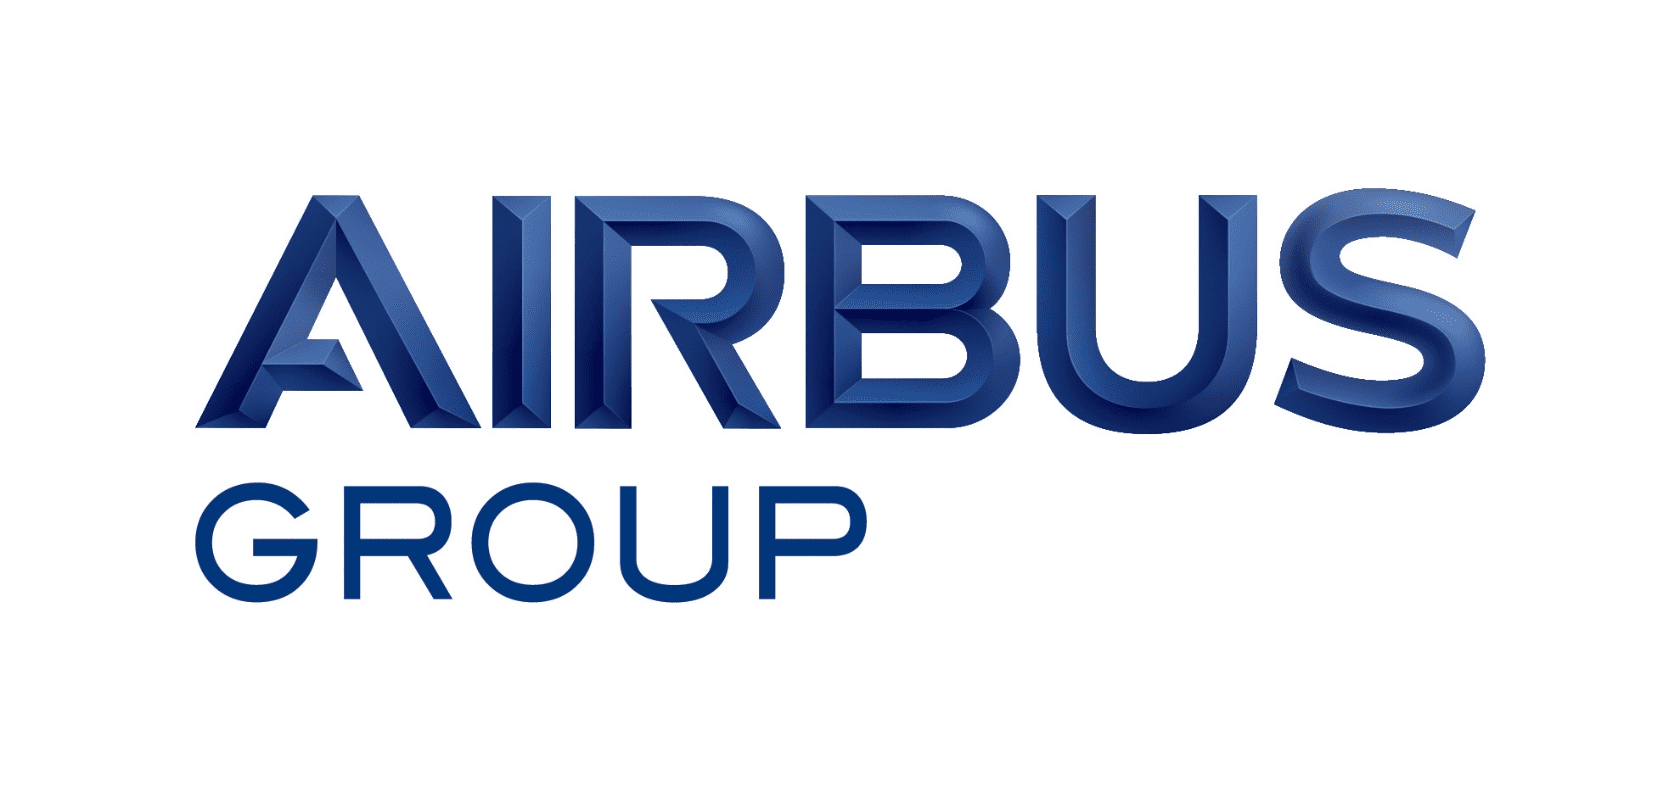 Airbus Group: Aircraft manufacturing - Air mobility.